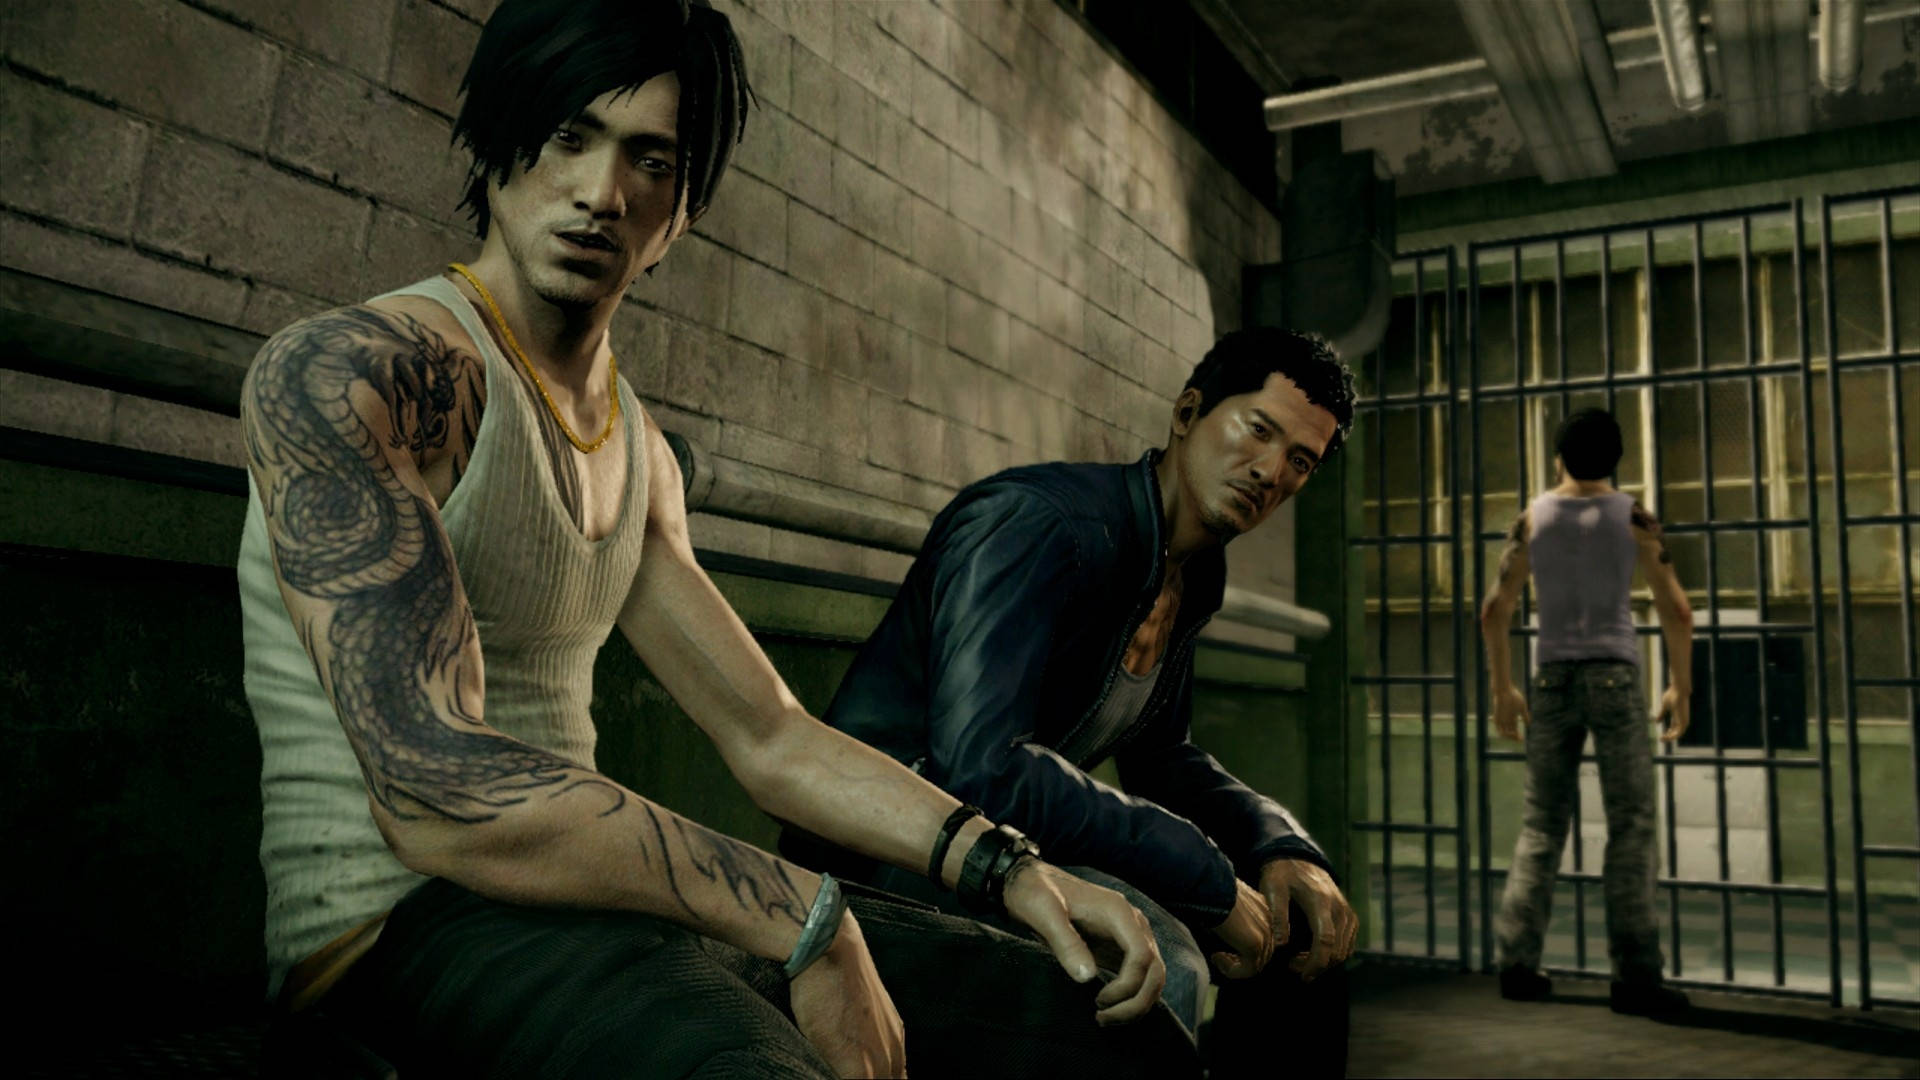 Sleeping Dogs Inside The Prison Background